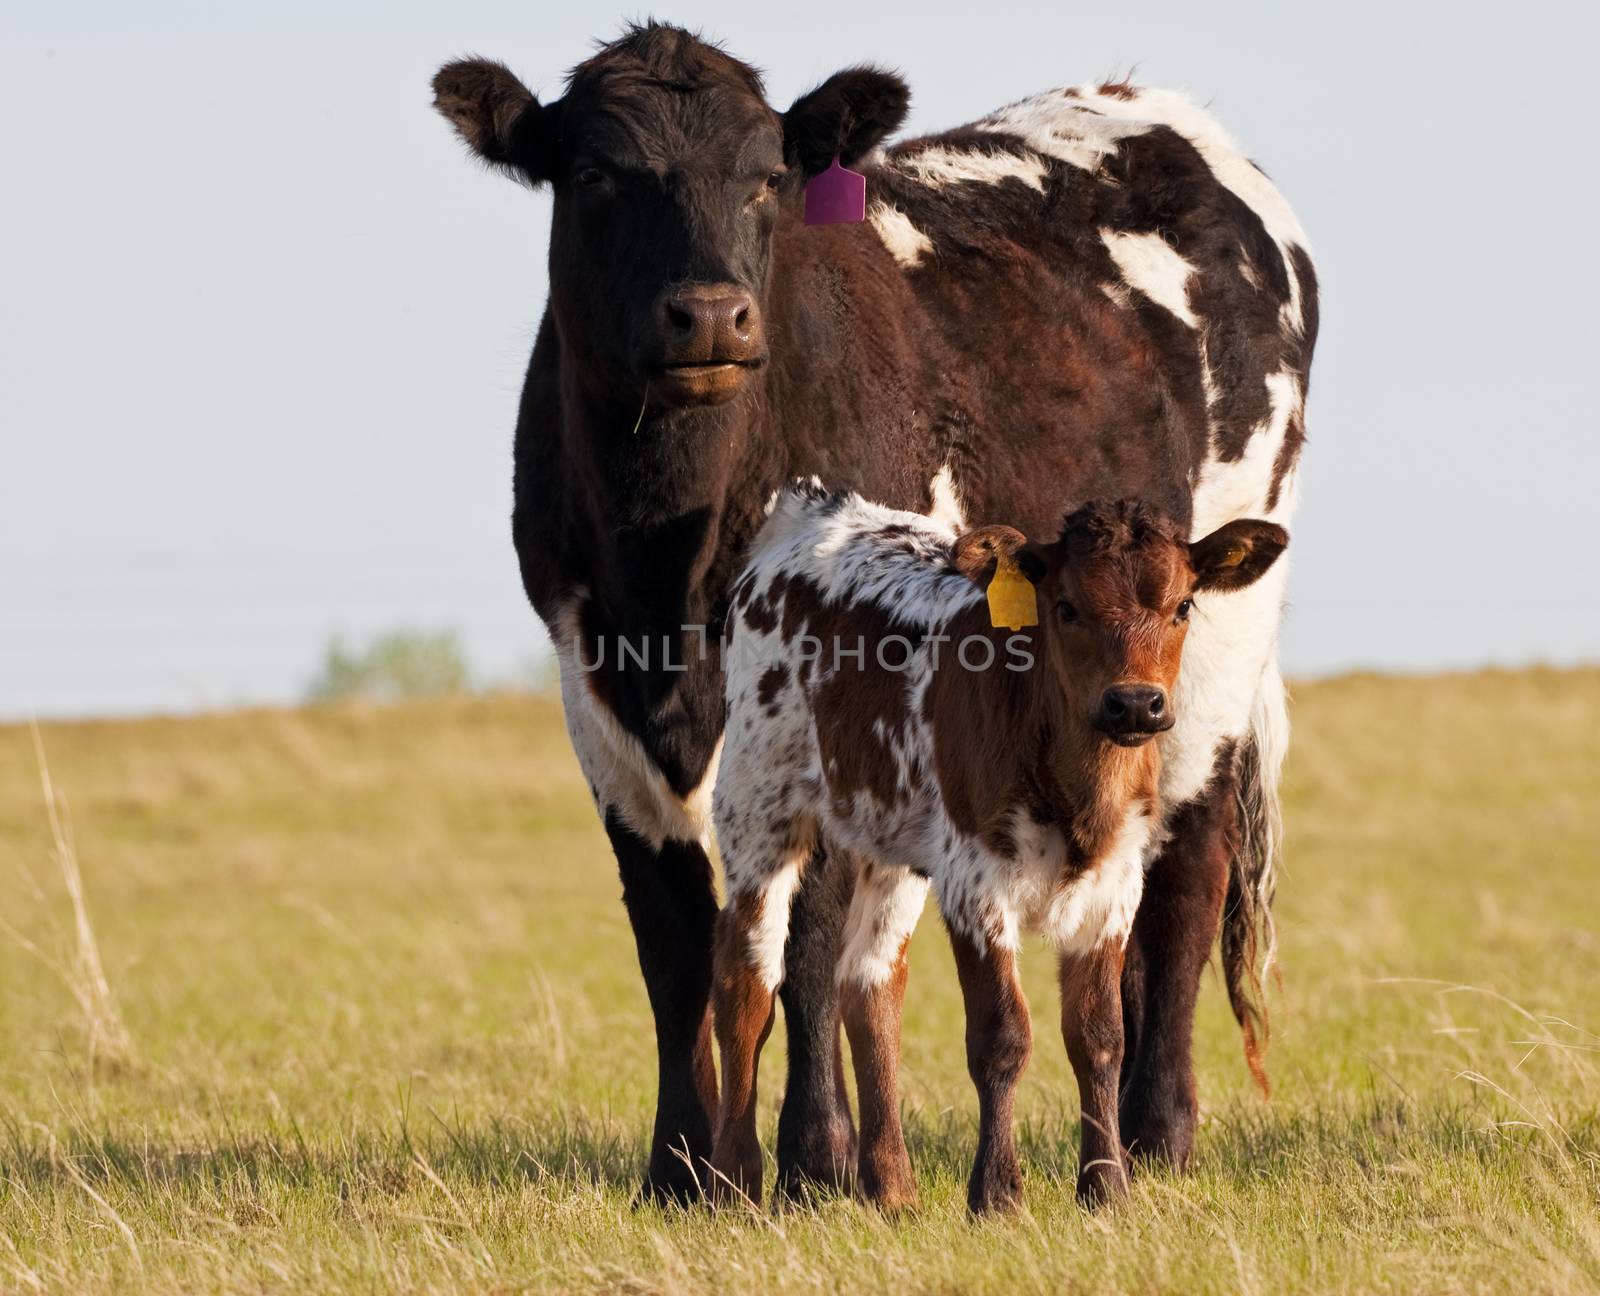 A mother cow with her calf close by.